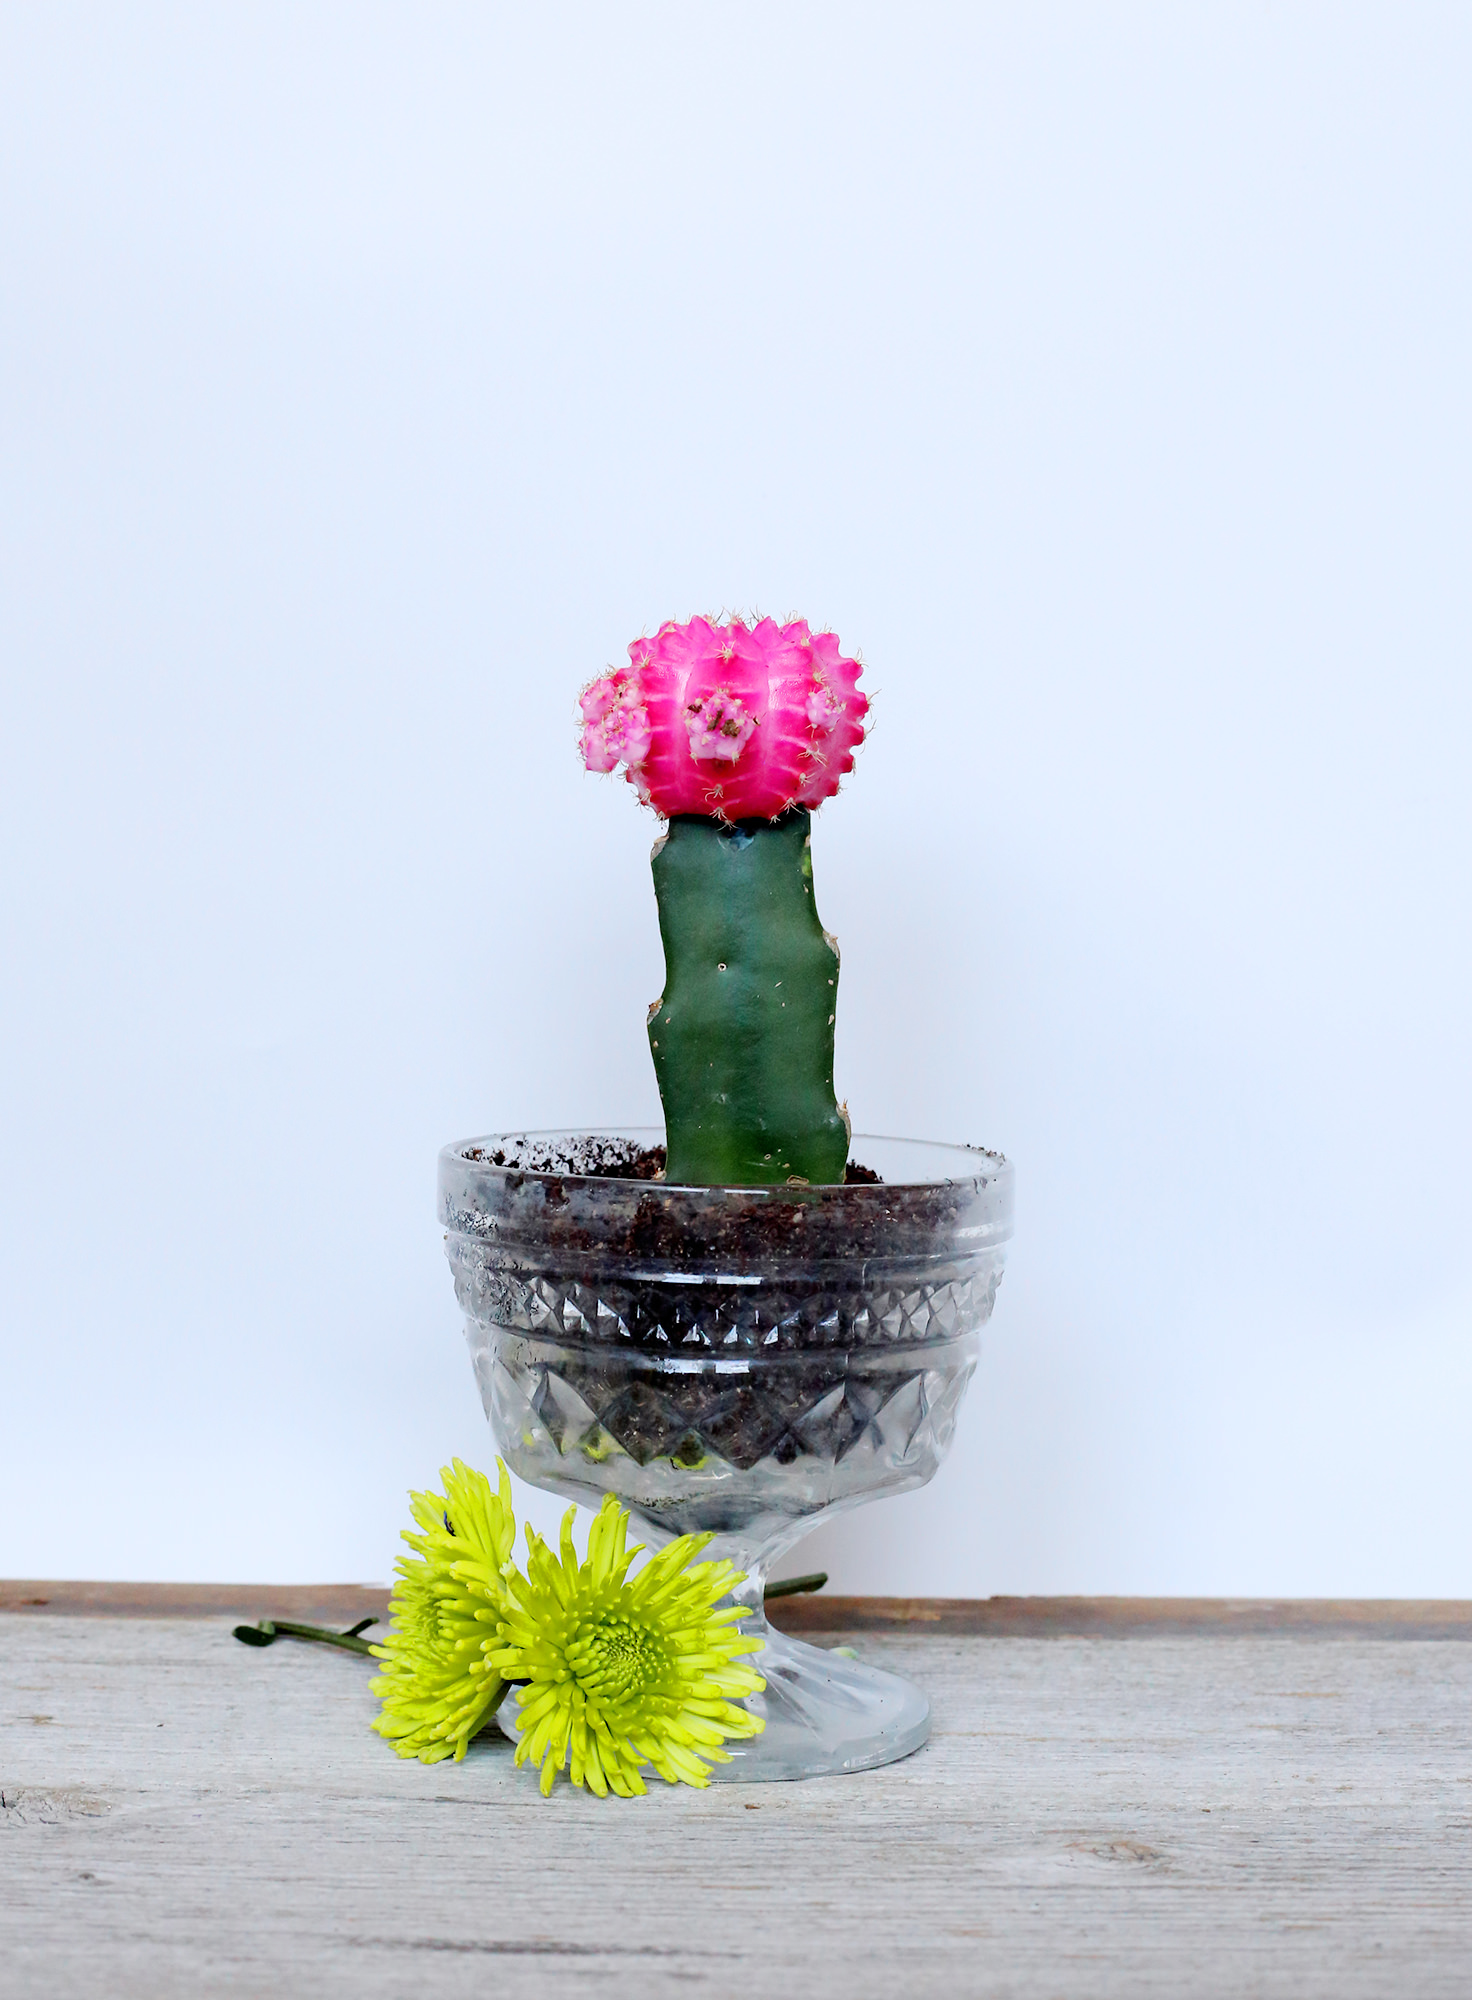 A classic glass dessert dish can be even sweeter as a succulent planter! A hot pink cactus keeps it unique and quirky!